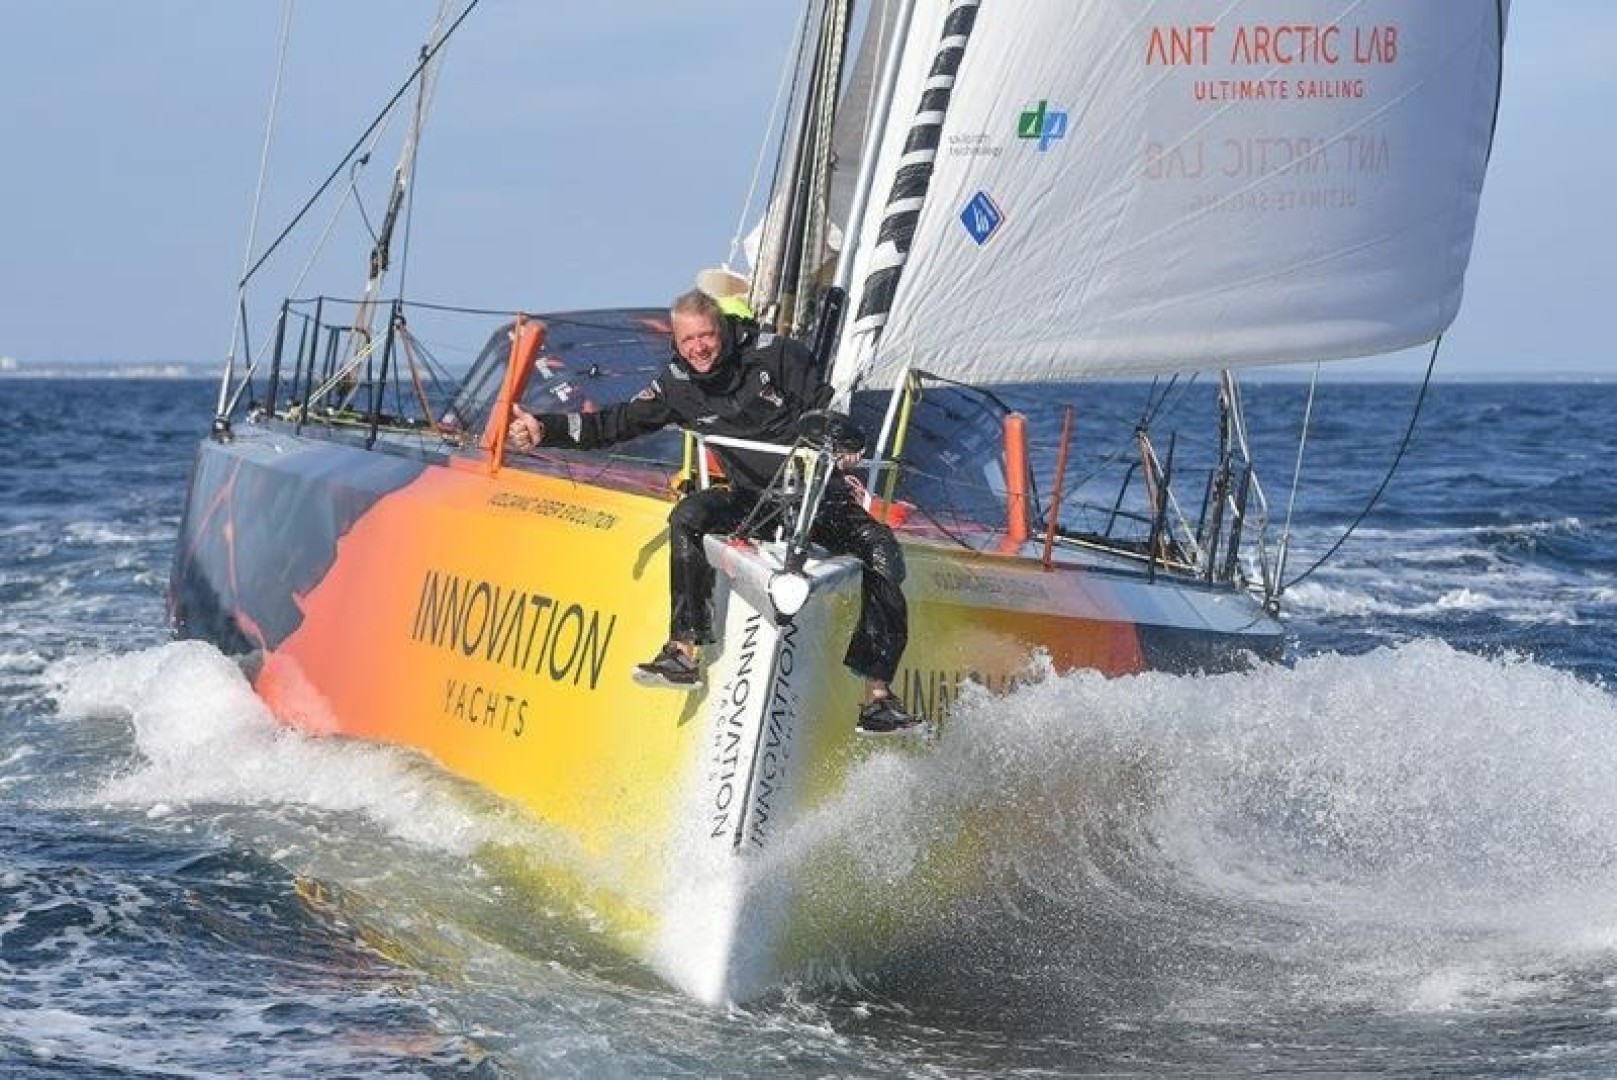 60 Days to the Departure for the Extreme Sailing ANT ARTIC LAB World Record Attempt